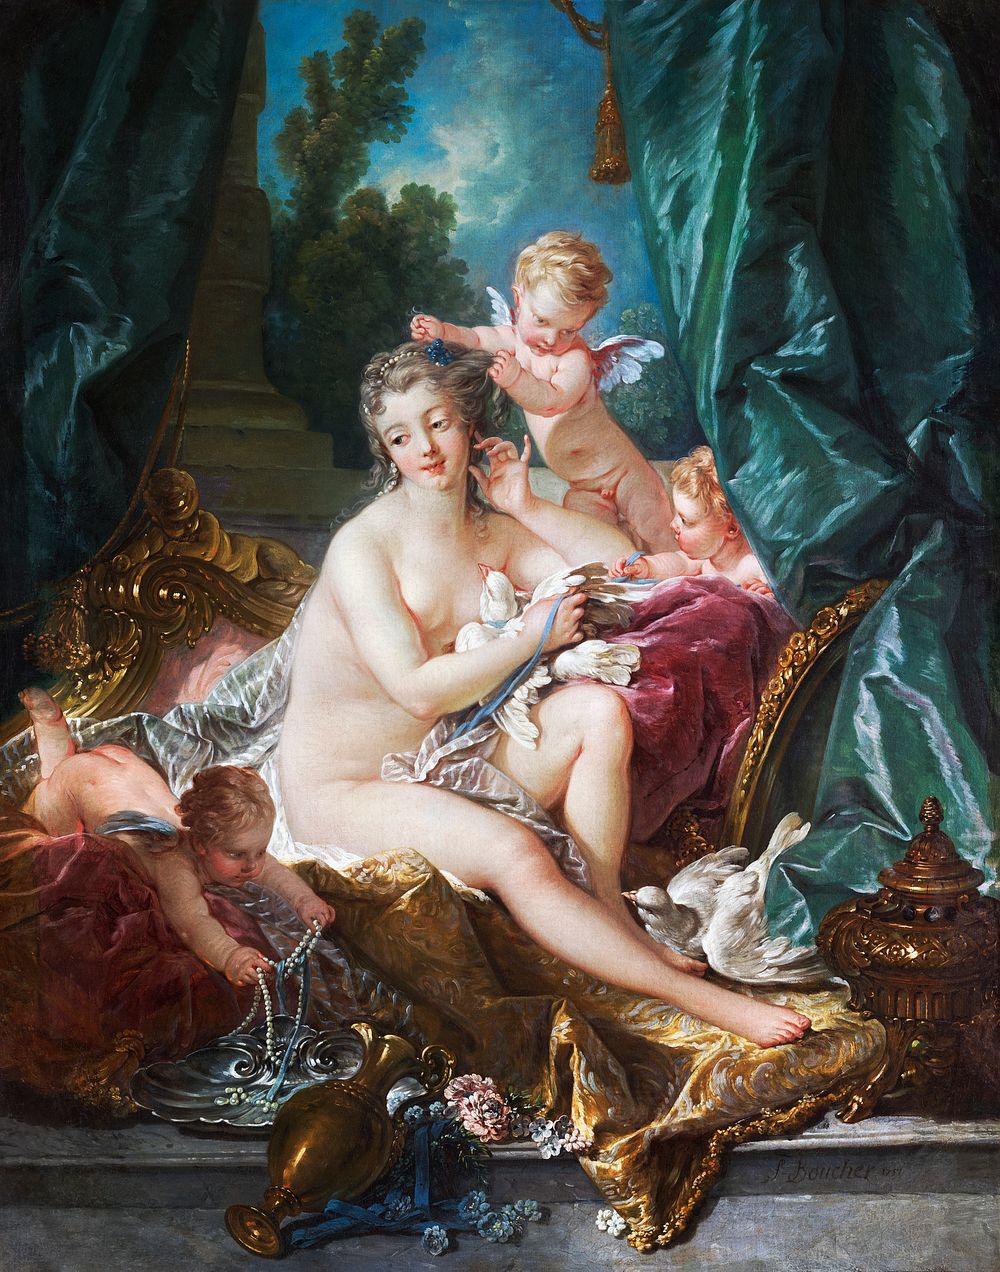 Francois Boucher's The Toilette of Venus (1751) famous painting. Original from The MET. Digitally enhanced by rawpixel.